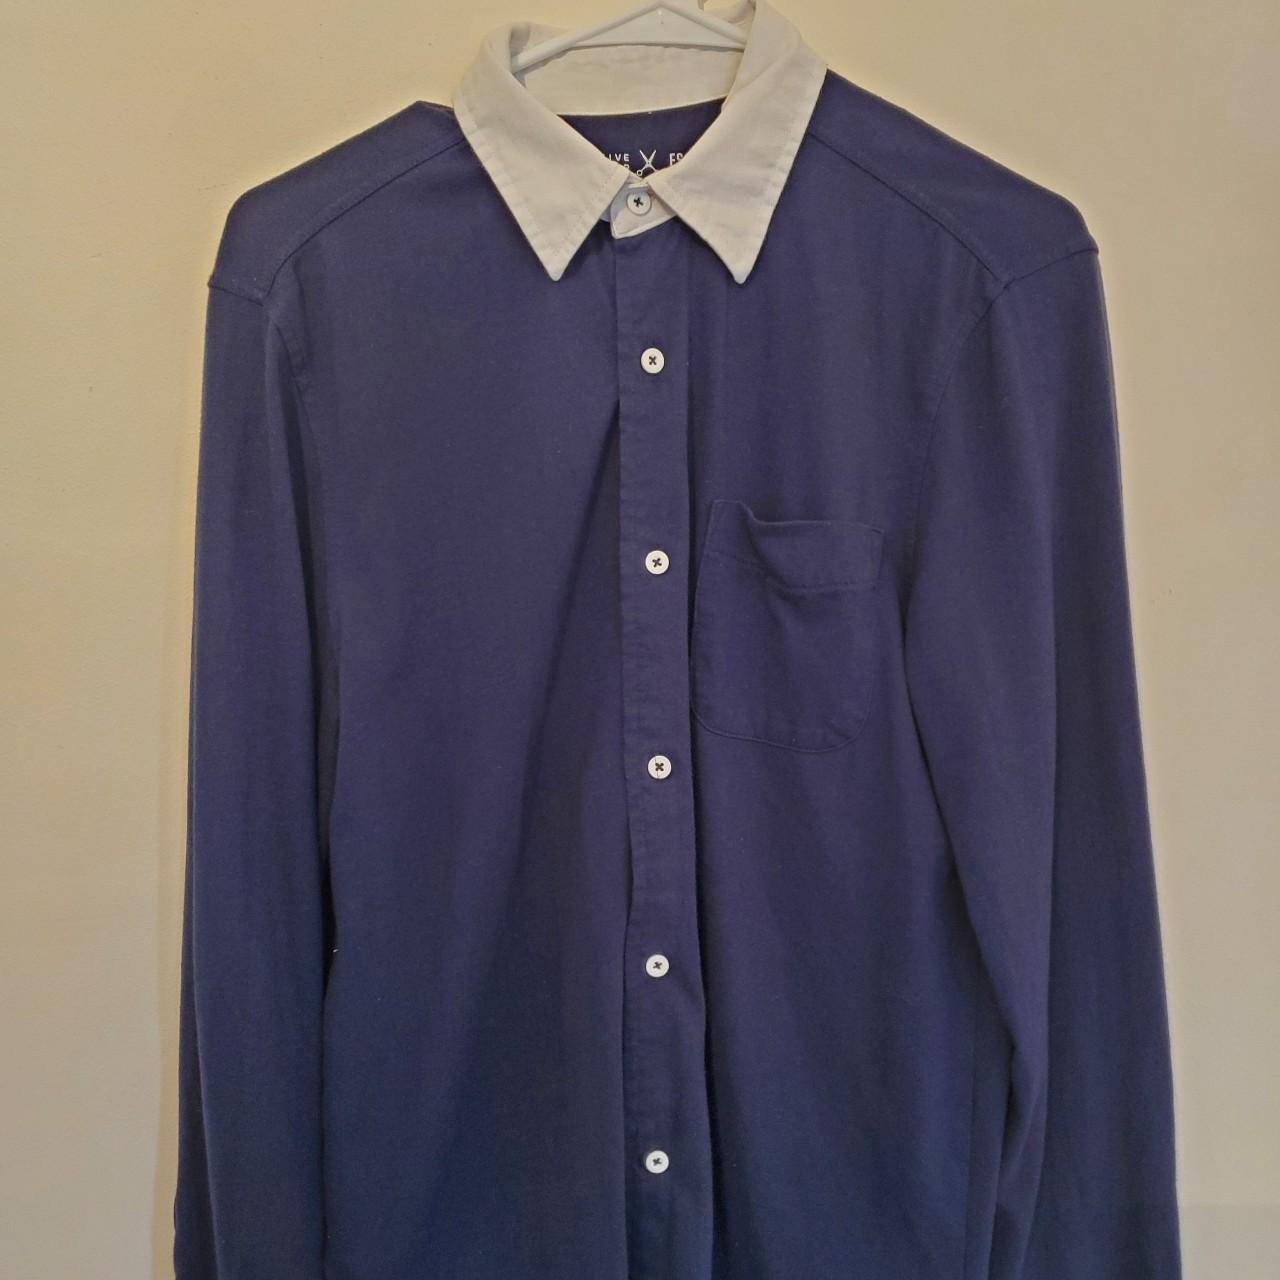 Very soft Five Four/ FSC blue button-up with white... - Depop